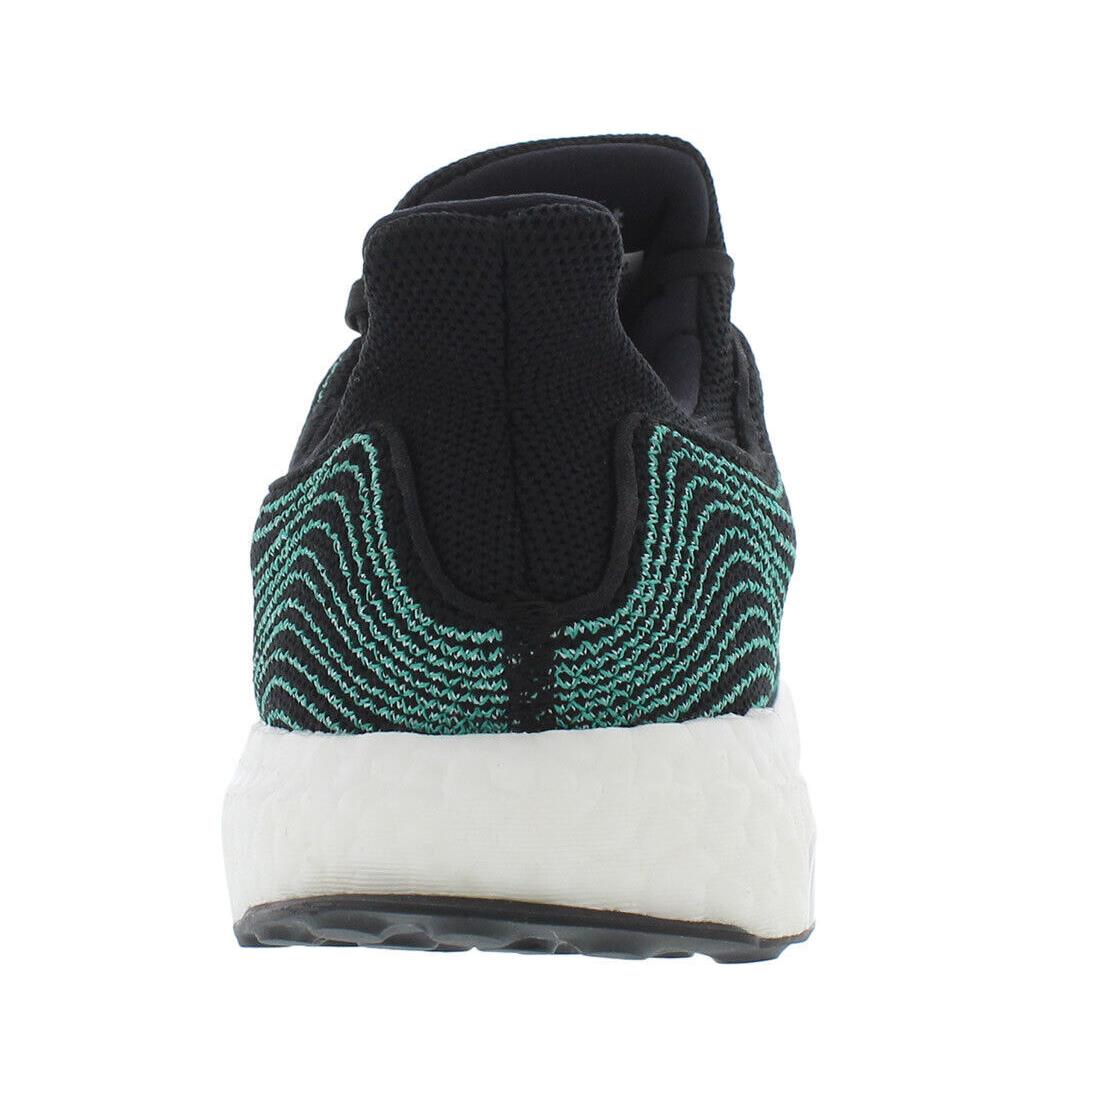 Adidas shoes UltraBoost DNA - BLACK/GREEN/WHITE 2